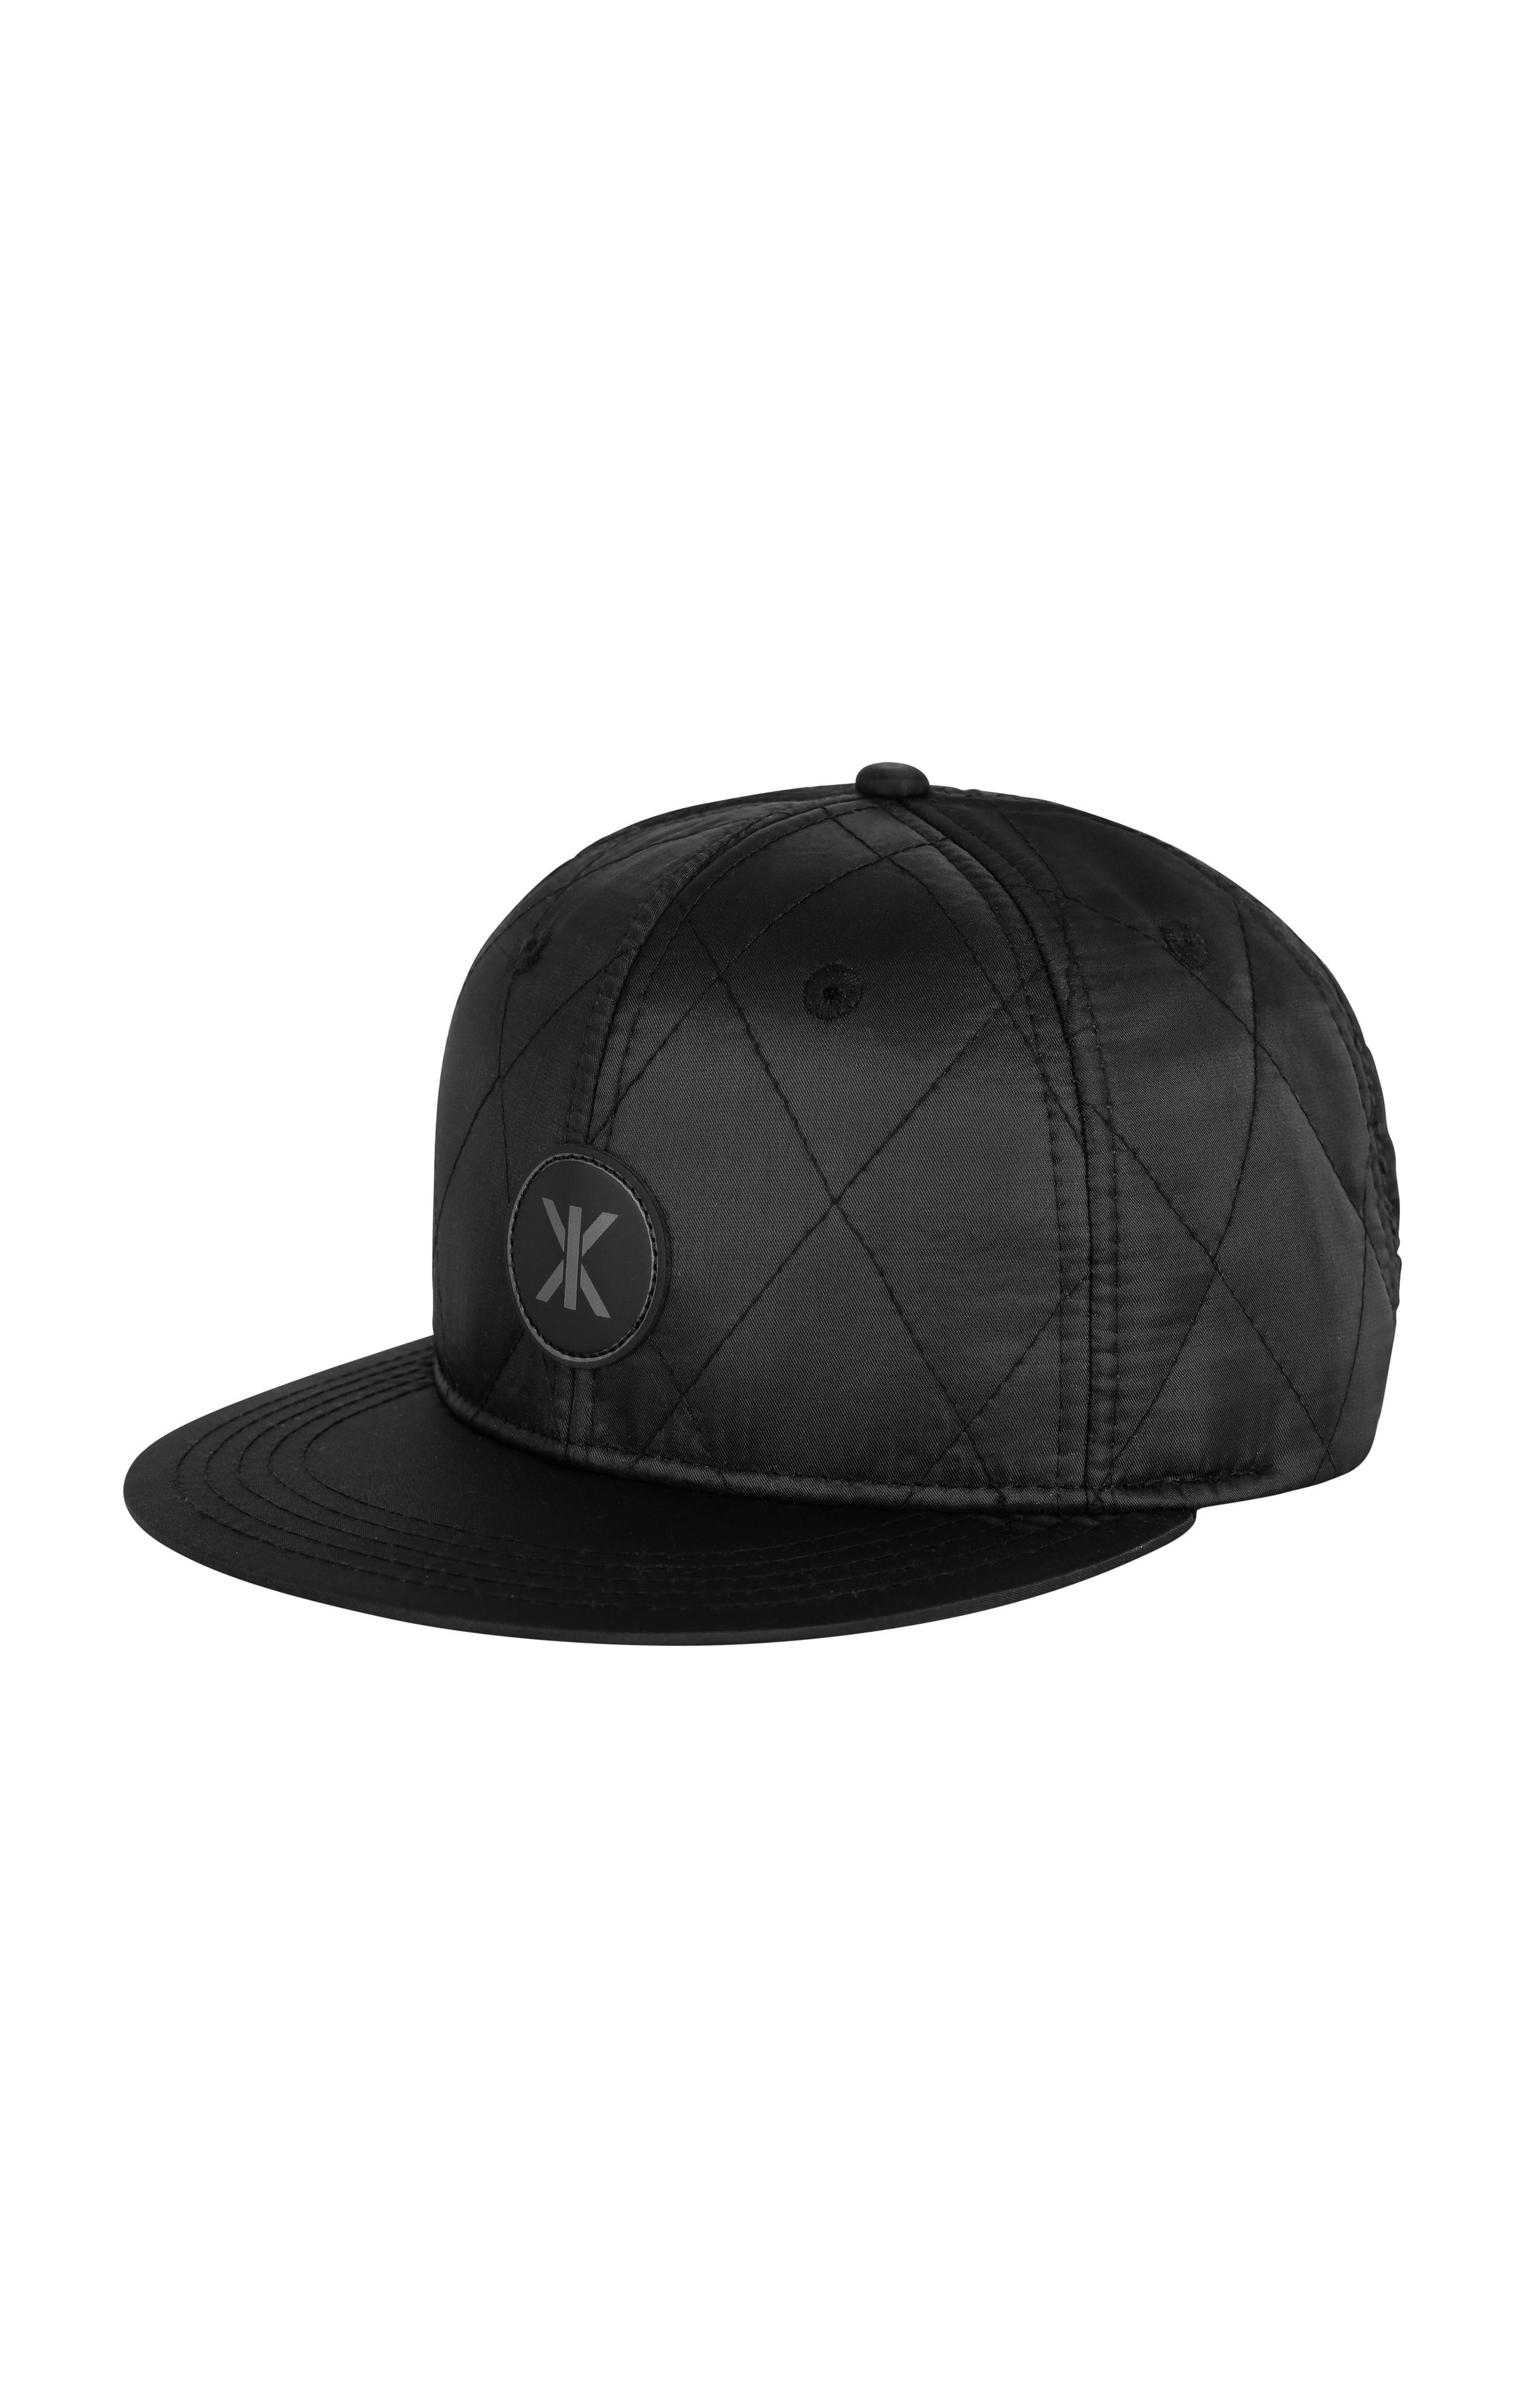 Onepiece Quilted Cap Snapback Black - 1